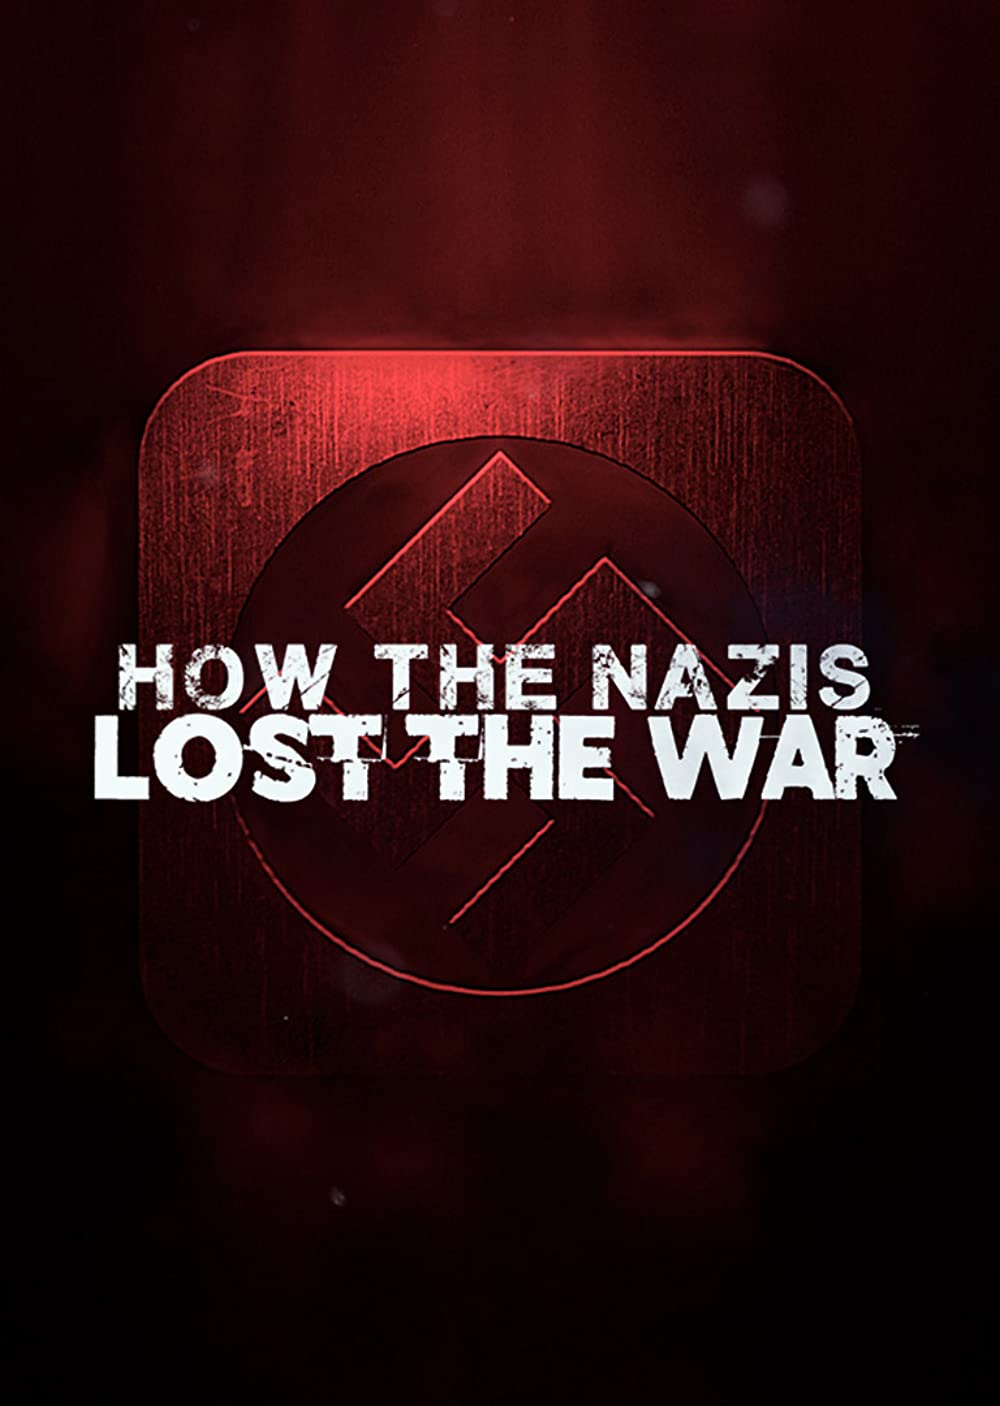 How the Nazis Lost the War S01 GG NLSUBBED 1080p WEB-DL DDP5 1 x264-KHN-DDF